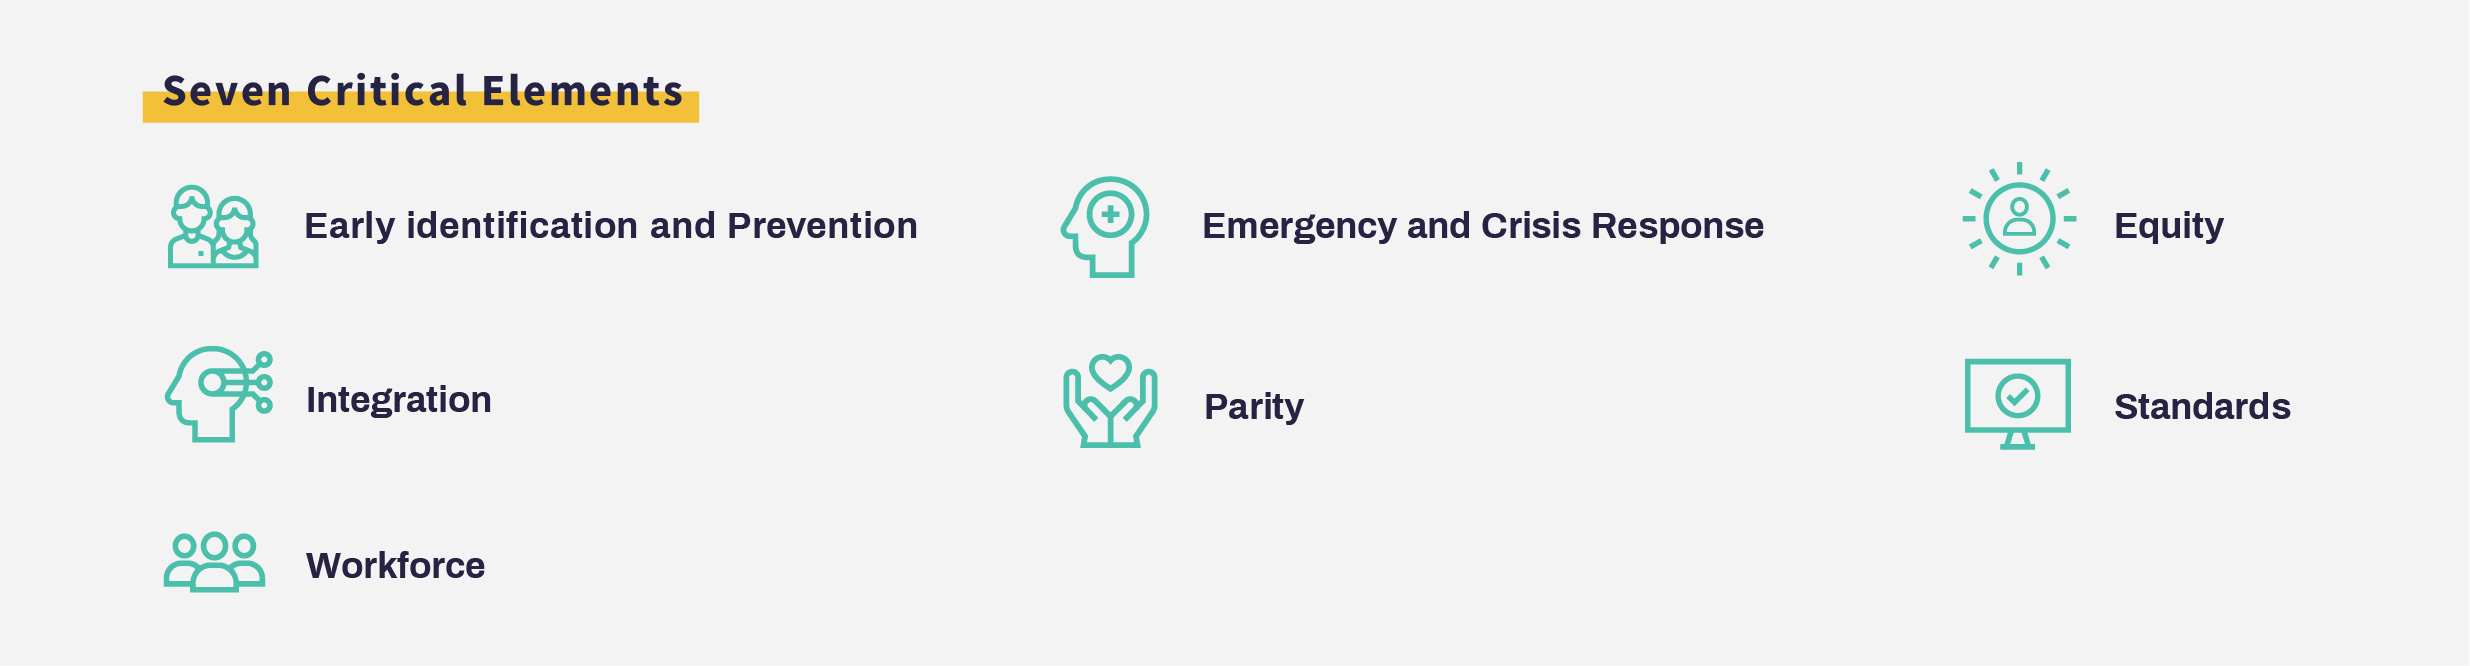 7 Critical Elements of the Unified Vision for the Future of Mental Health, Well-Being and Addiction in the United States: Early Identification and Prevention, Integration, Workforce, Emergency and Crisis Response, Parity, Equity, Standards